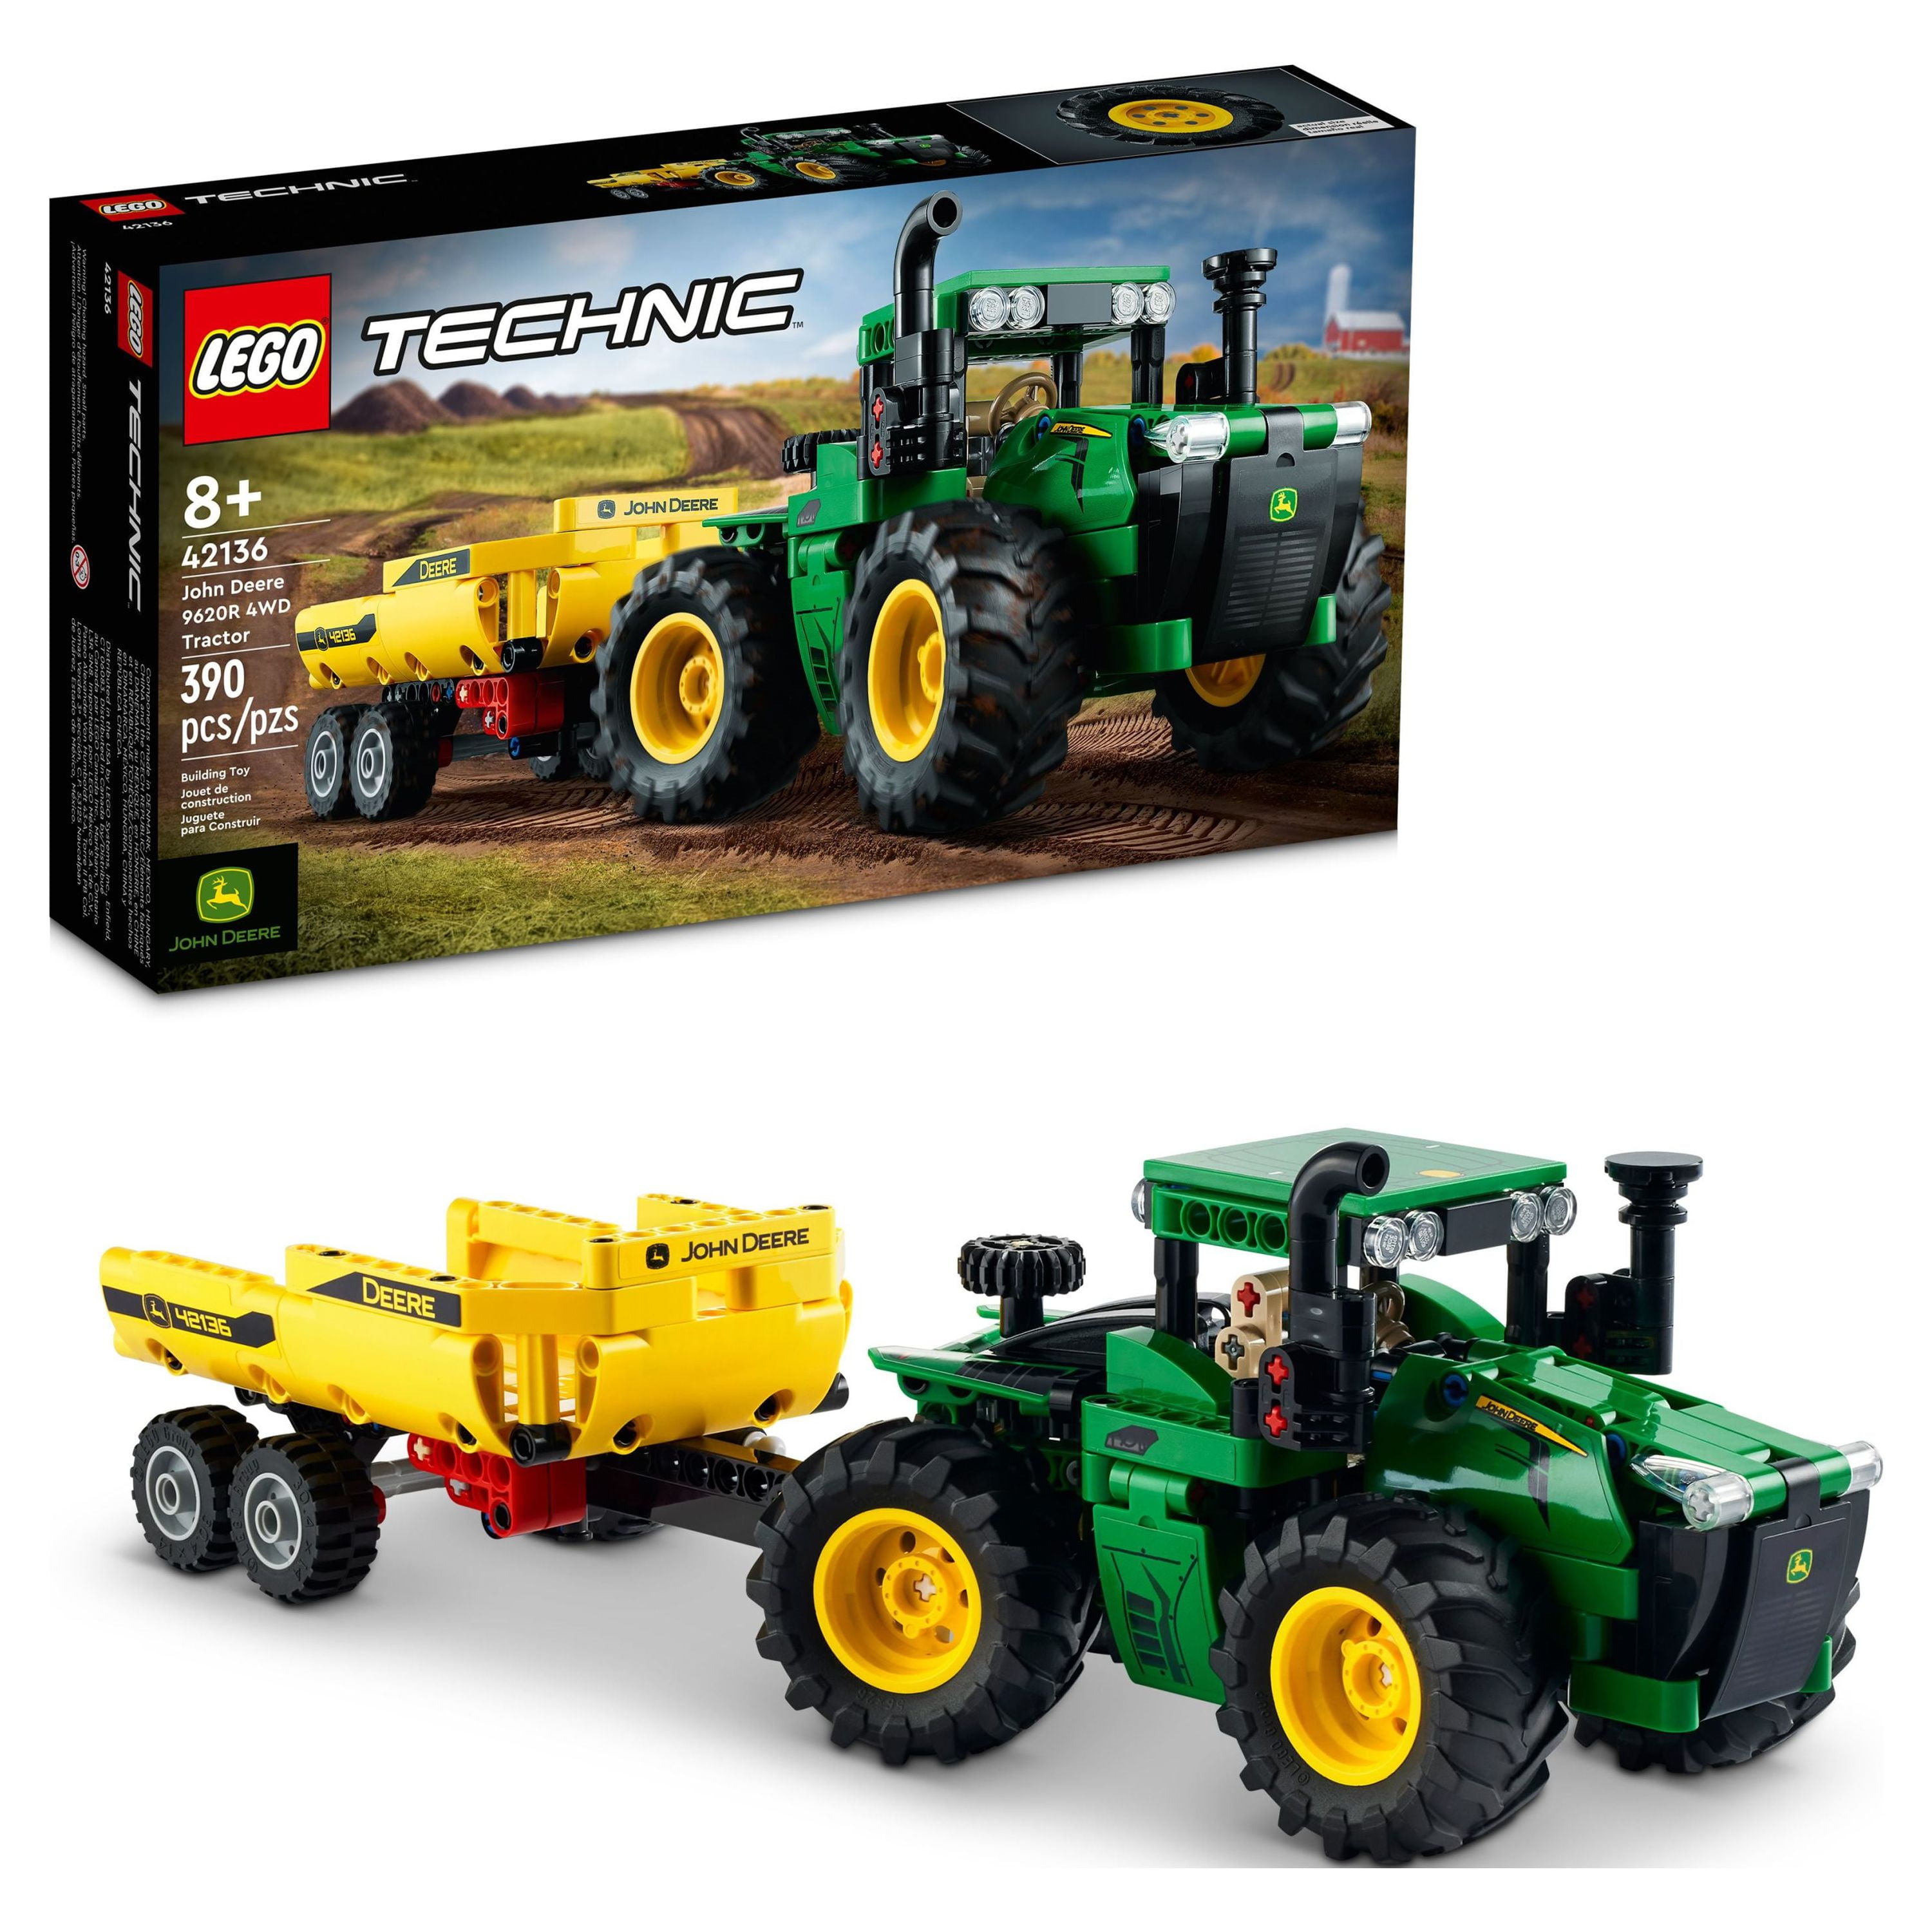 LEGO Technic 42136 John Deere 9620R 4WD Tractor detailed review and MOC  comparison 